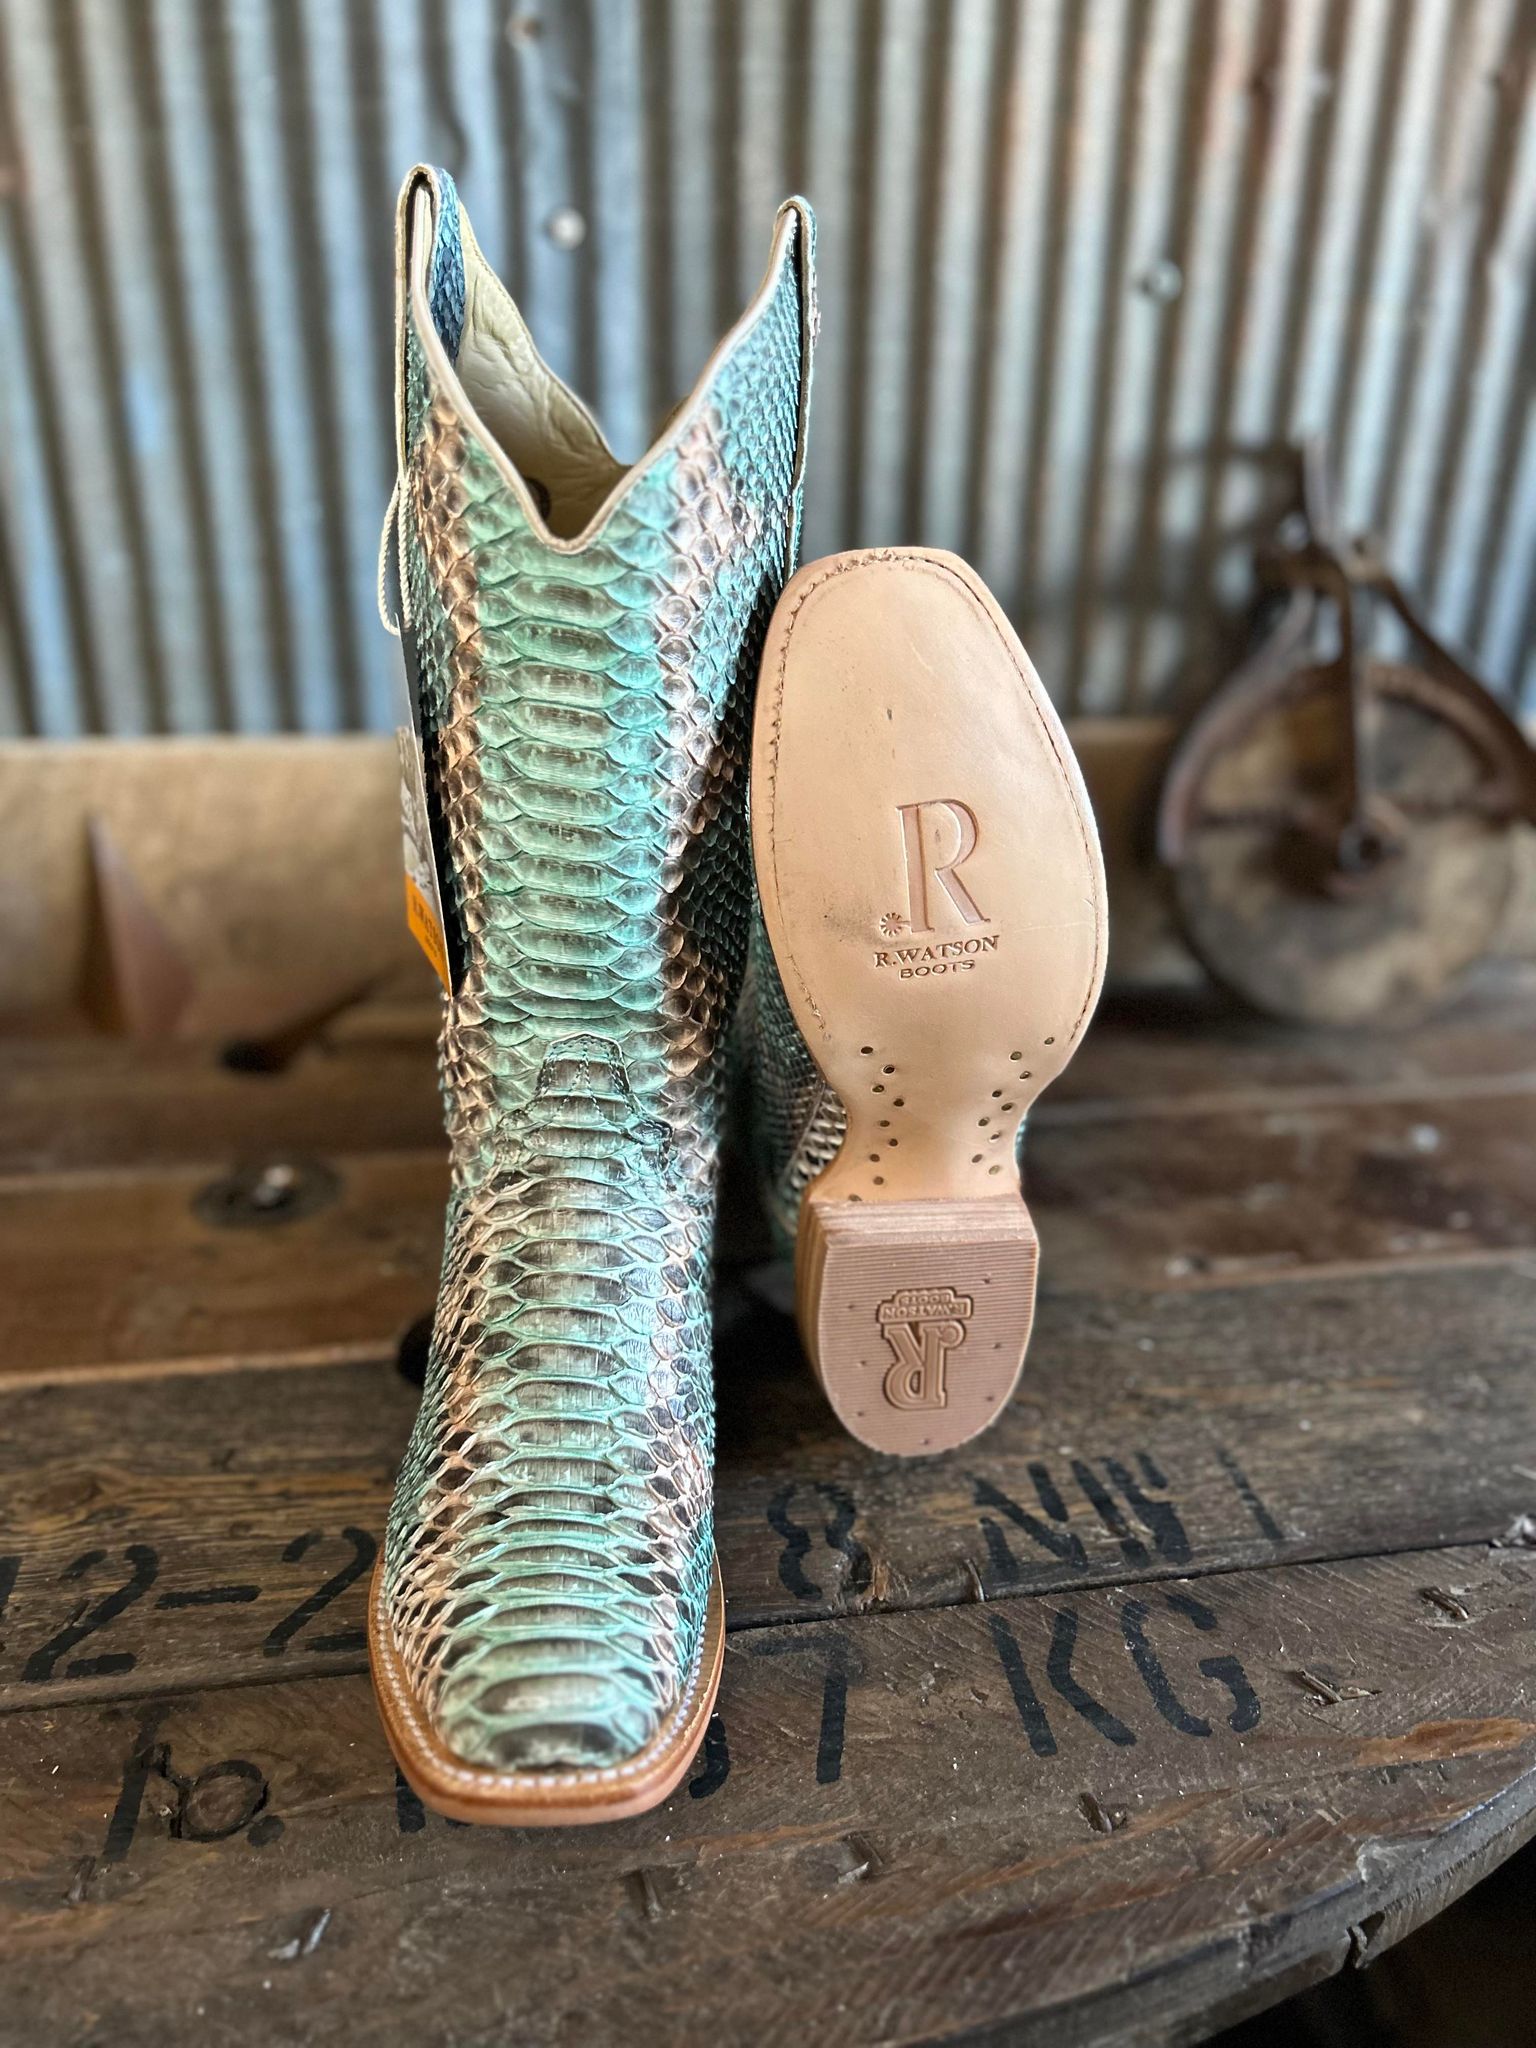 R. Watson Teal and Copper Python Boots-Women's Boots-R. Watson-Lucky J Boots & More, Women's, Men's, & Kids Western Store Located in Carthage, MO